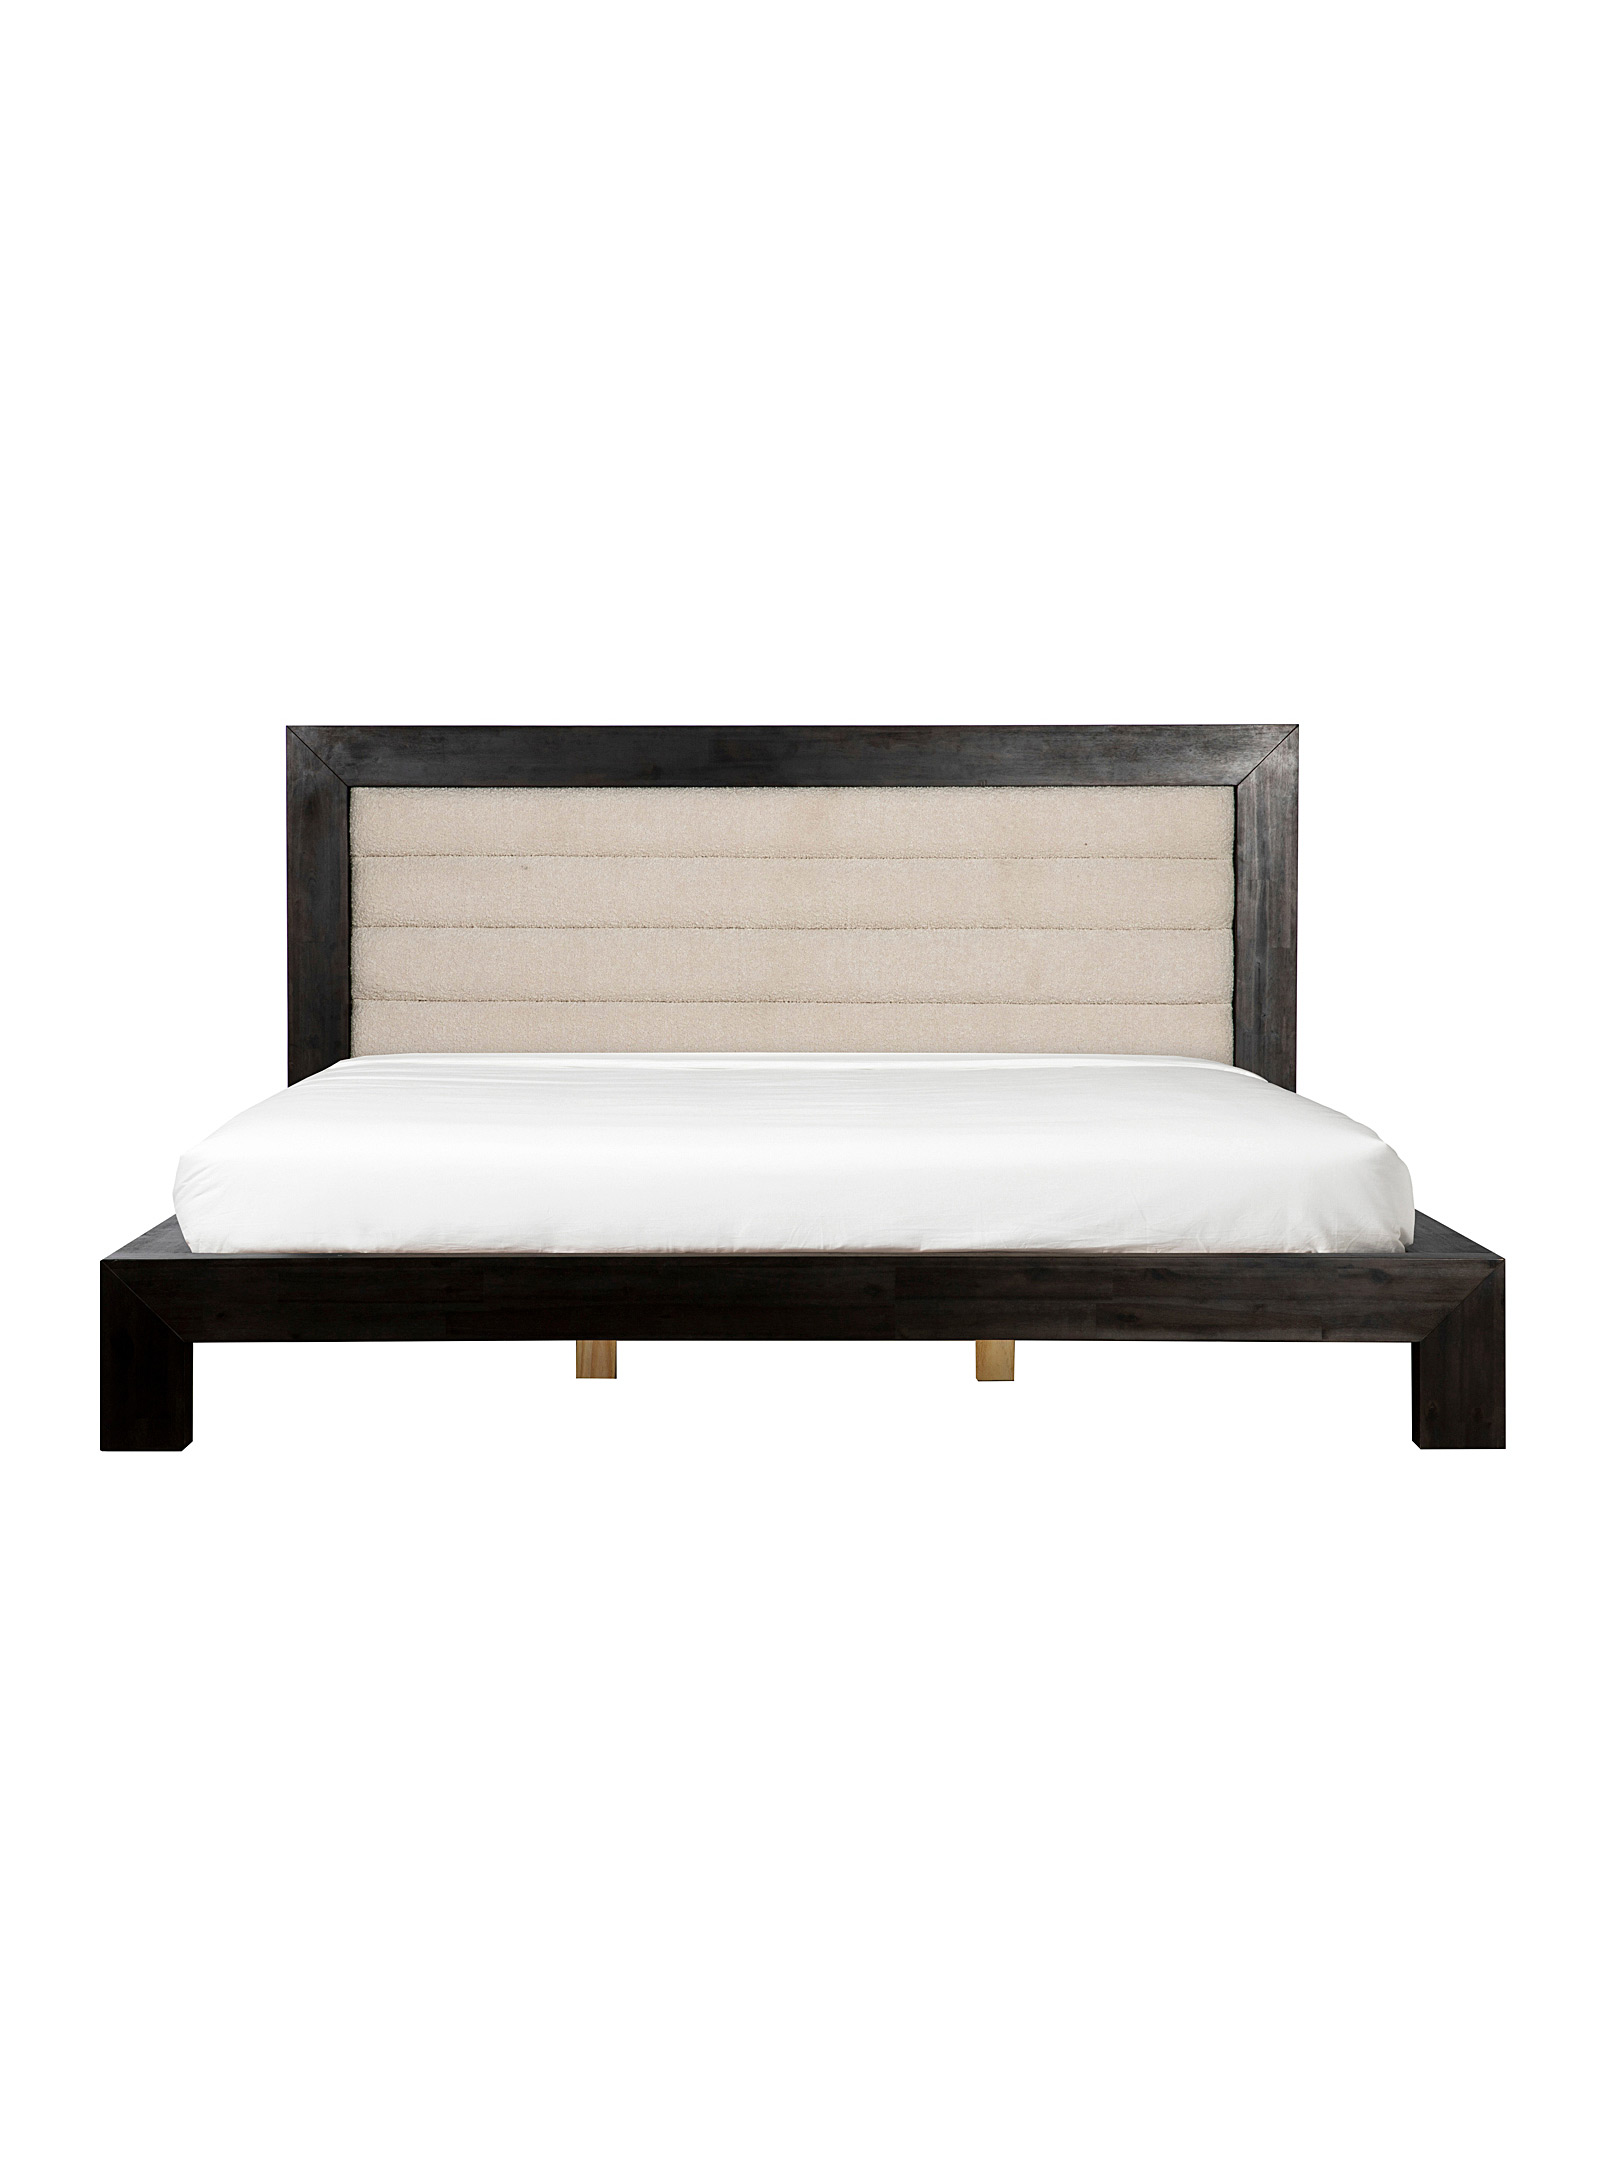 Moe's Home Collection - Ashcroft modern bed frame 2-piece set See available sizes